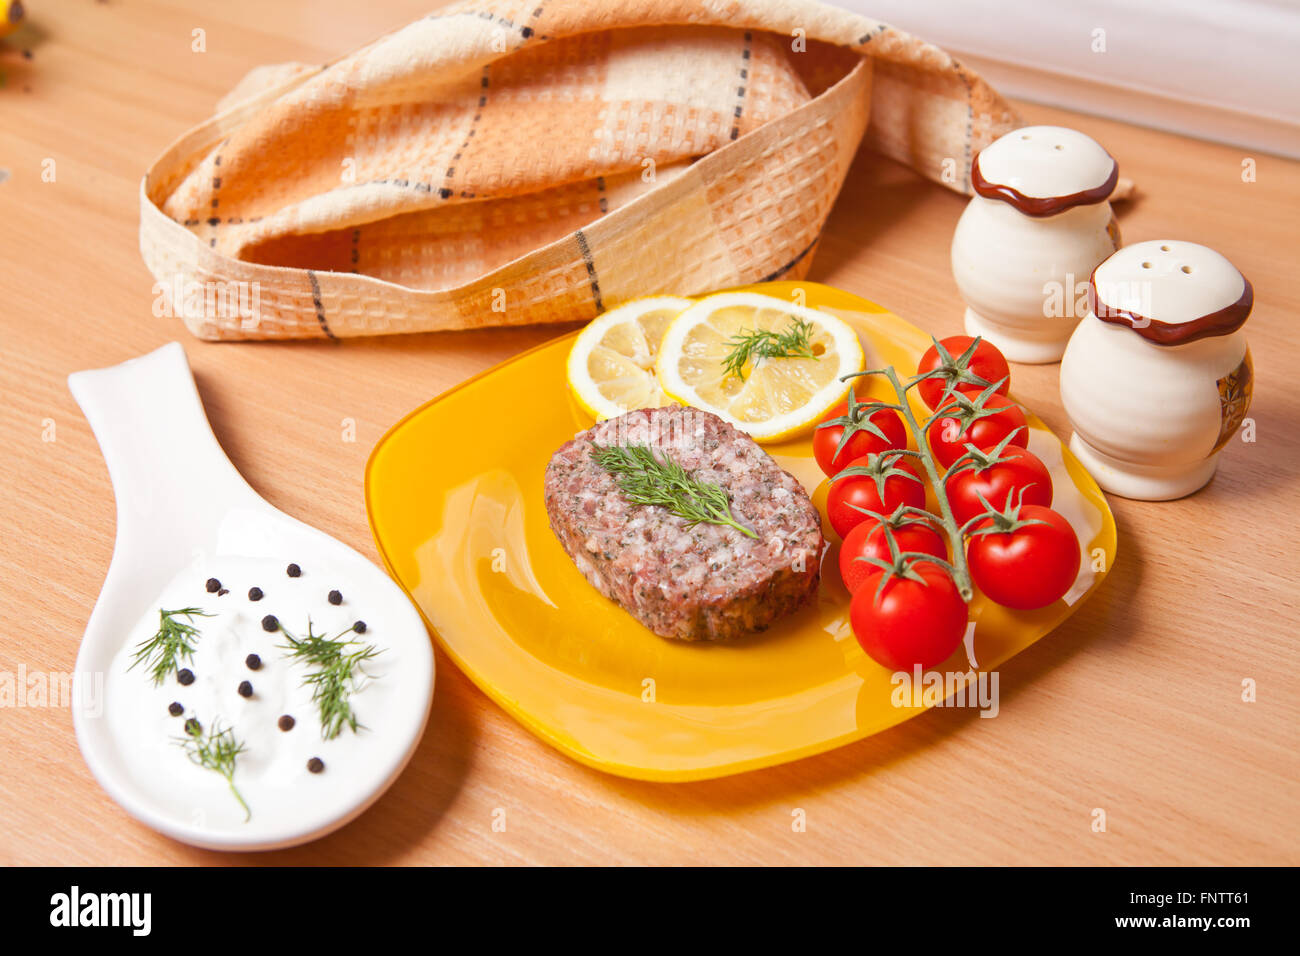 cutlet on a plate with cherry tomatoes Stock Photo